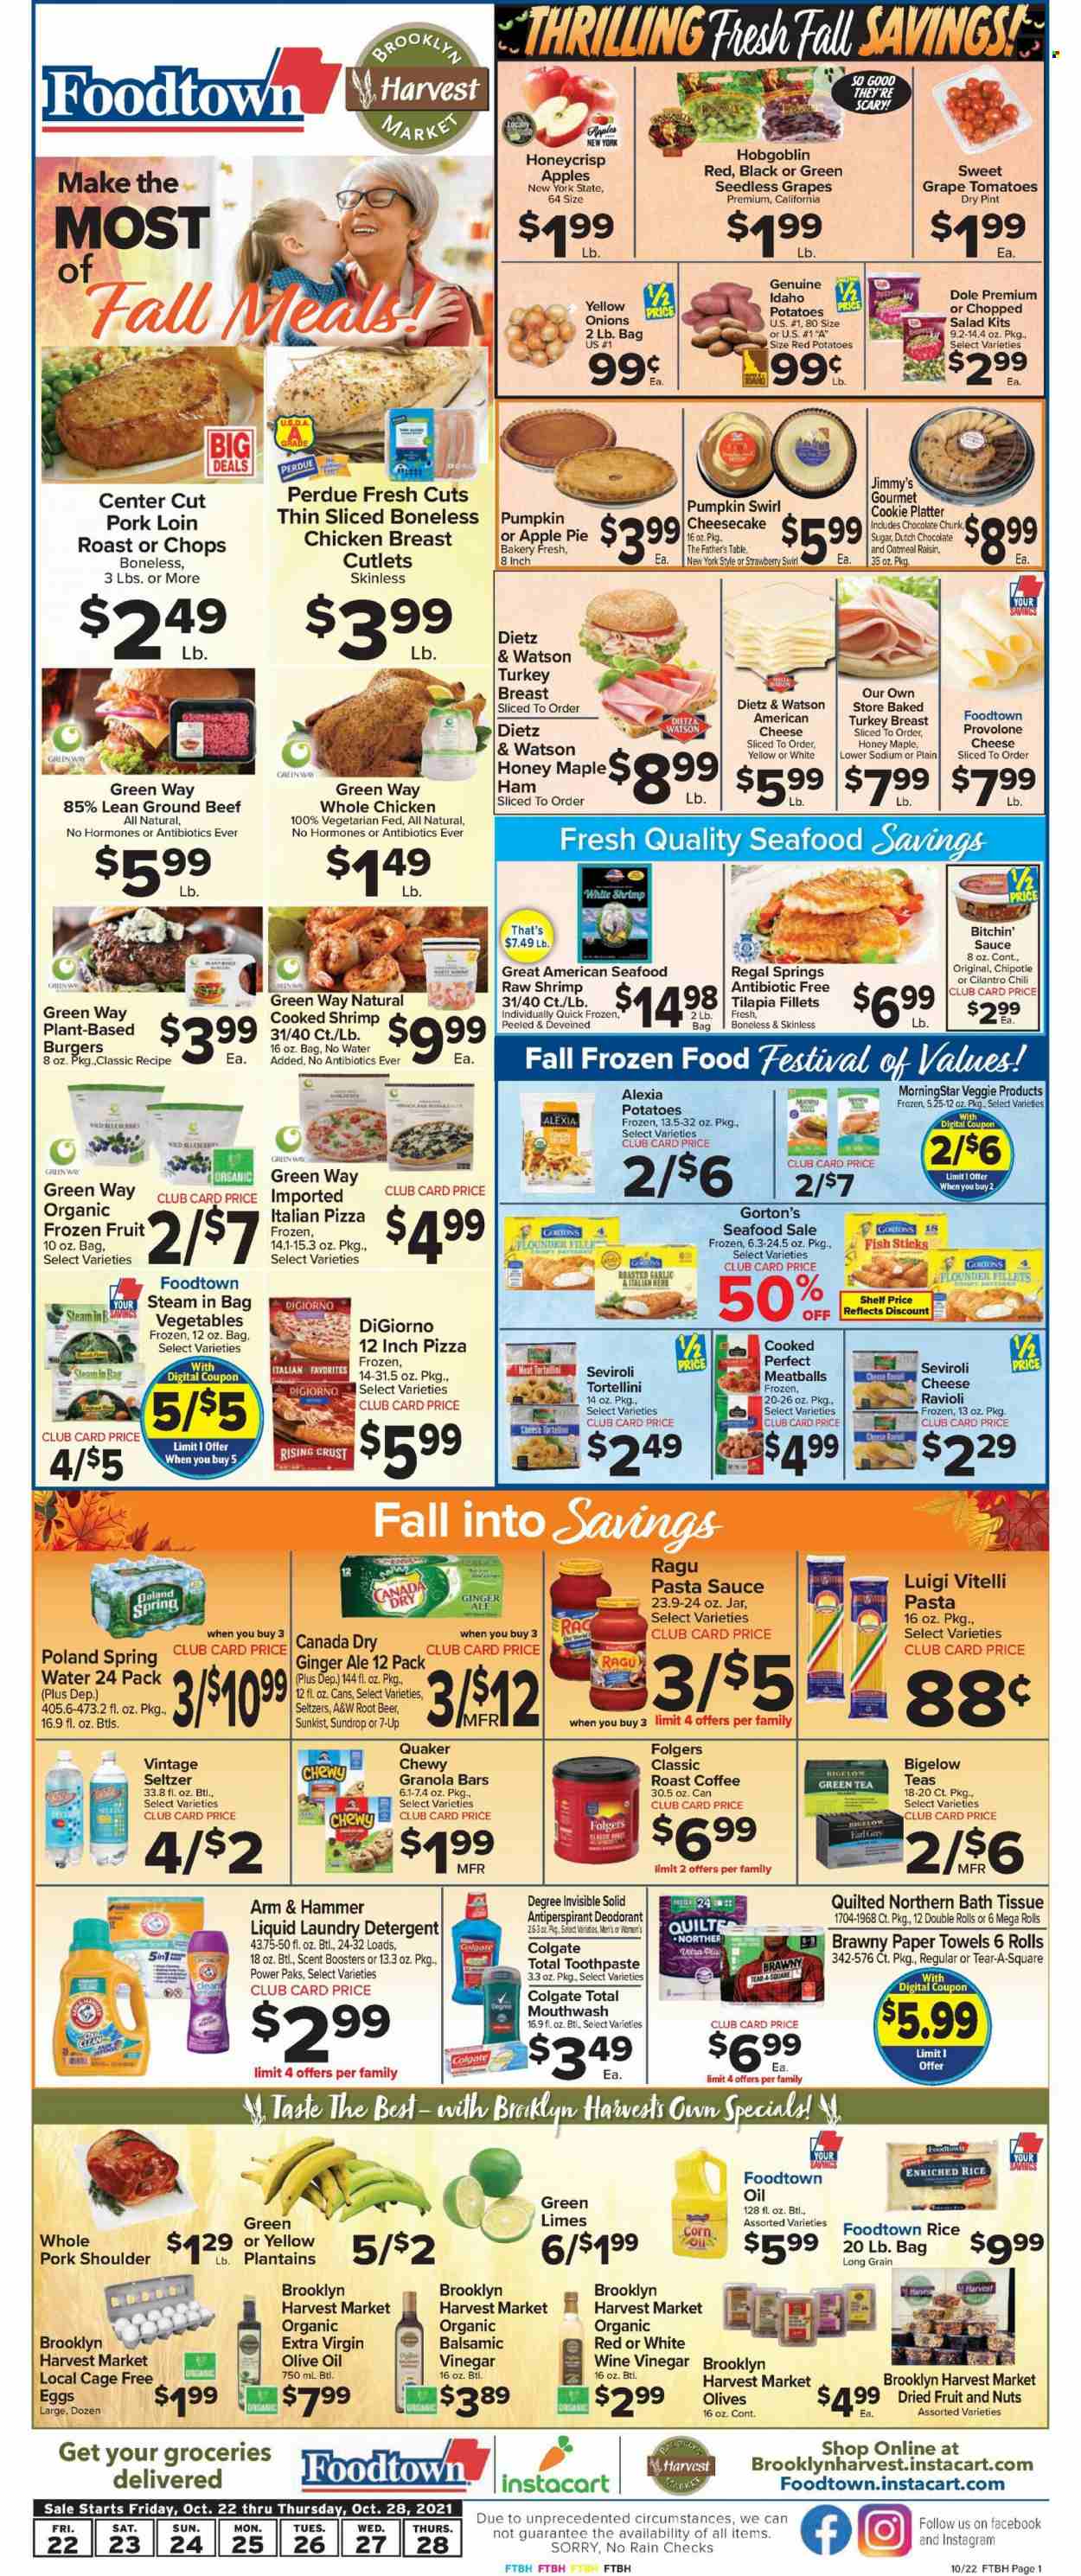 thumbnail - Foodtown Flyer - 10/22/2021 - 10/28/2021 - Sales products - seedless grapes, Father's Table, apple pie, cheesecake, corn, potatoes, onion, Dole, red potatoes, chopped salad, limes, tilapia, seafood, fish, shrimps, fish fingers, Gorton's, fish sticks, ravioli, pizza, pasta sauce, meatballs, hamburger, sauce, tortellini, Quaker, Perdue®, ragú pasta, ham, Dietz & Watson, american cheese, Provolone, eggs, cage free eggs, organic frozen fruit, ARM & HAMMER, sugar, oatmeal, olives, granola bar, rice, cilantro, ragu, extra virgin olive oil, vinegar, wine vinegar, olive oil, oil, dried fruit, Canada Dry, ginger ale, 7UP, A&W, seltzer water, green tea, tea, coffee, Folgers, beer, turkey breast, whole chicken, beef meat, ground beef, pork loin, pork meat, pork shoulder, bath tissue, Quilted Northern, kitchen towels, paper towels, detergent, laundry detergent, scent booster, Colgate, toothpaste, mouthwash, anti-perspirant, deodorant, plantains. Page 1.